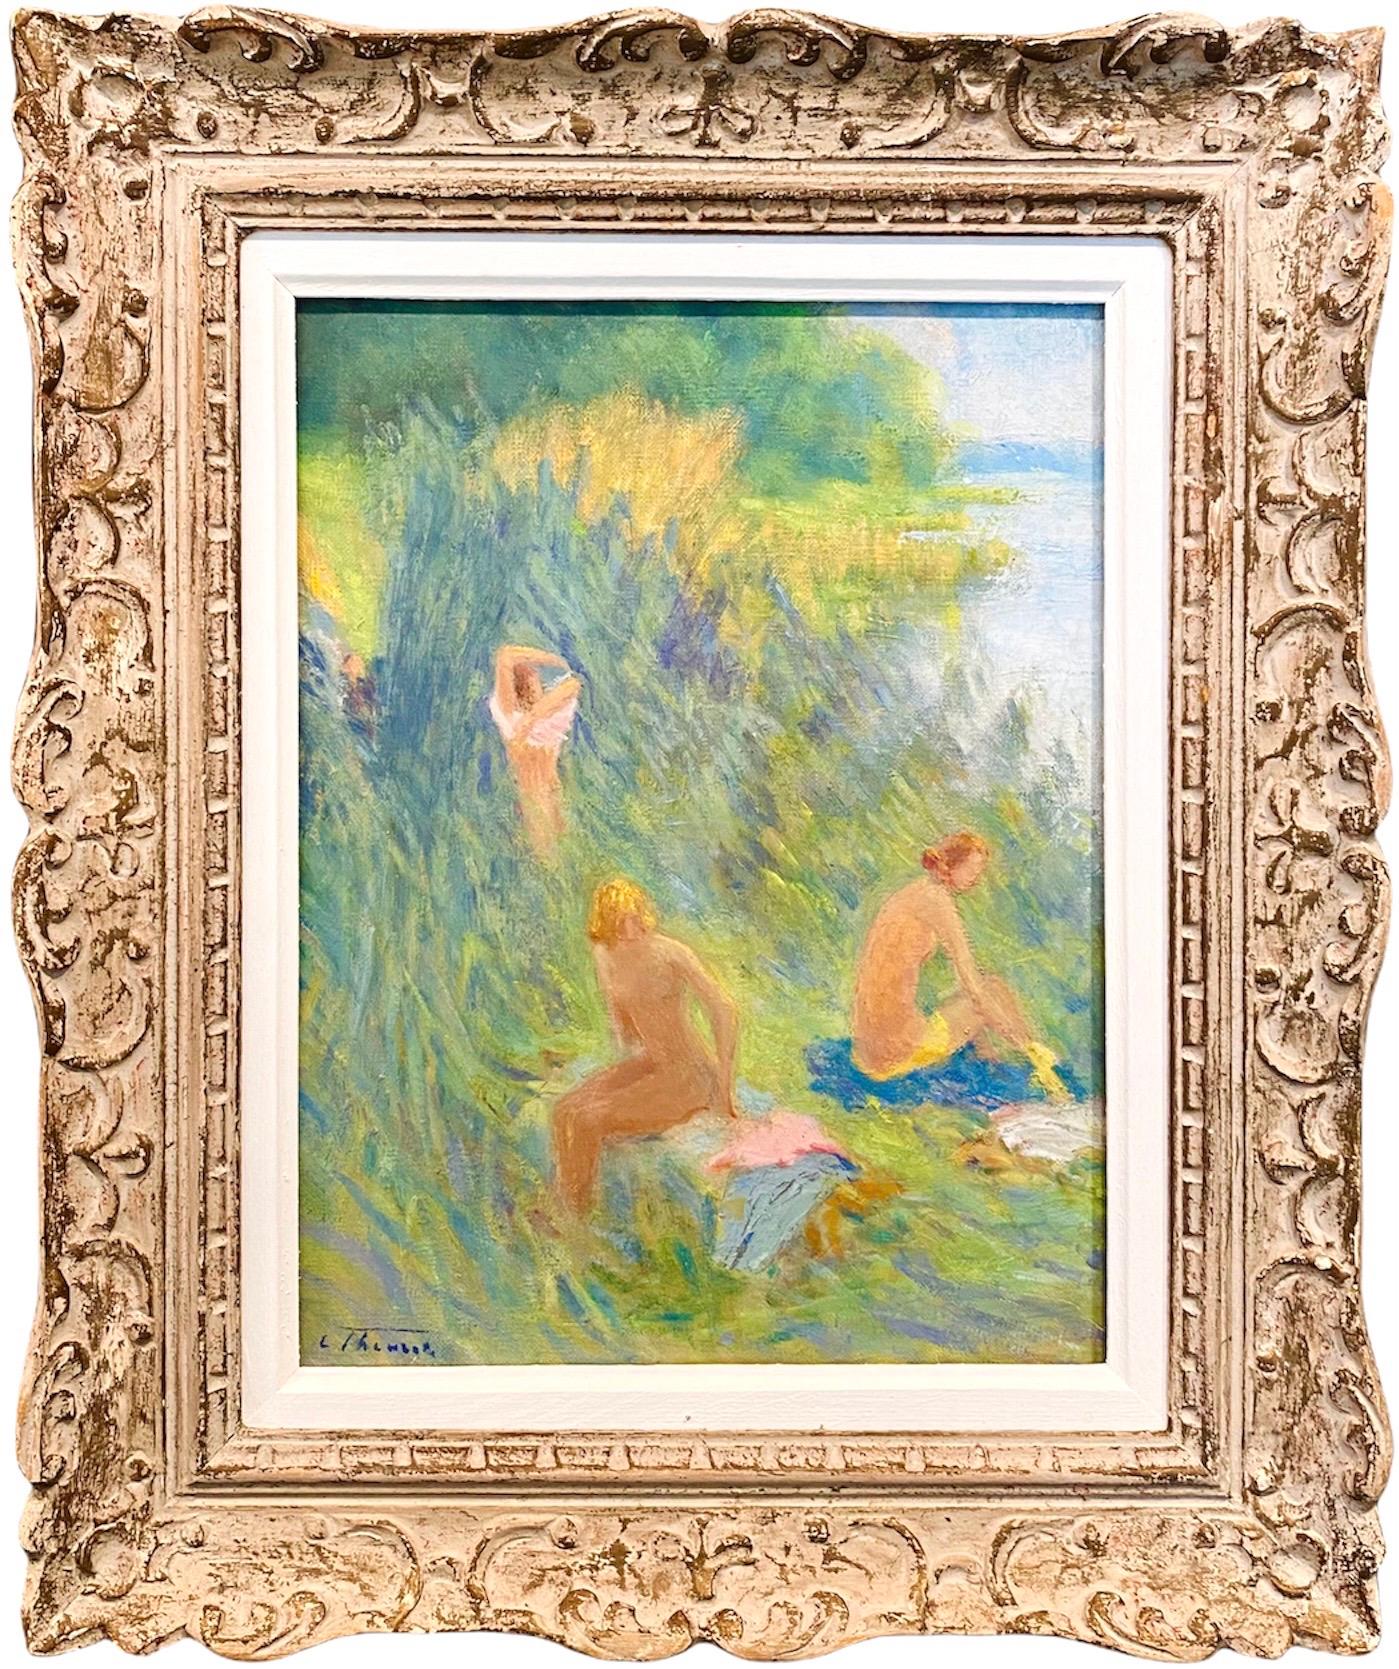 Unknown Landscape Painting - Antique French Post impressionist painting - Les baigneuses - Group Manet Nude